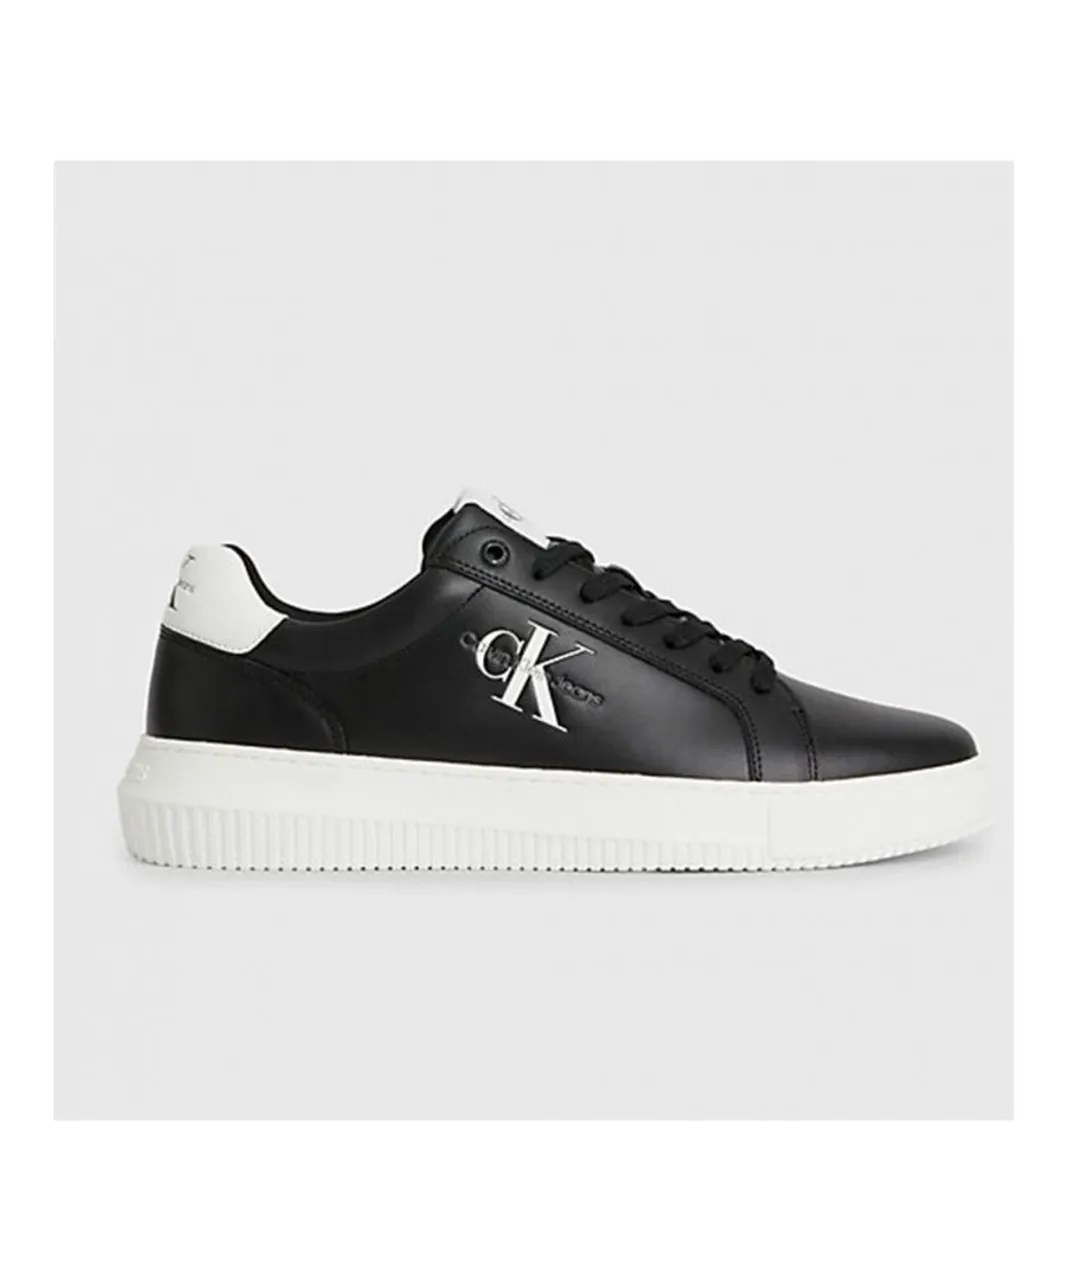 Calvin Klein Mens Chunky Sole Trainers in Black Leather